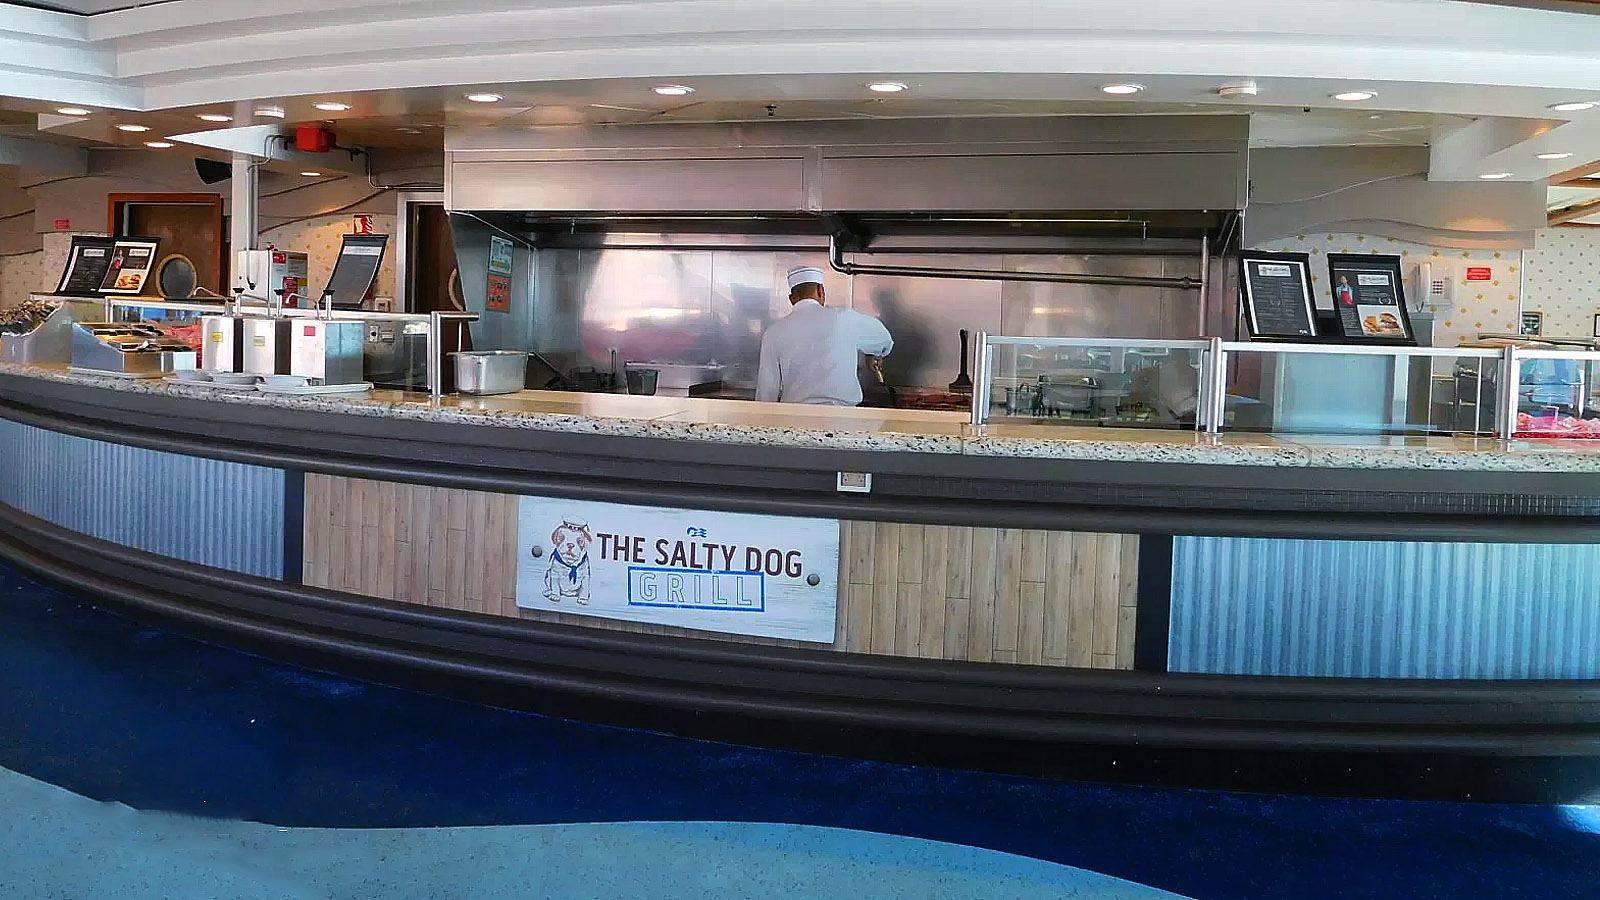 The Salty Dog Grill on the Princess Cruises Emerald Princess